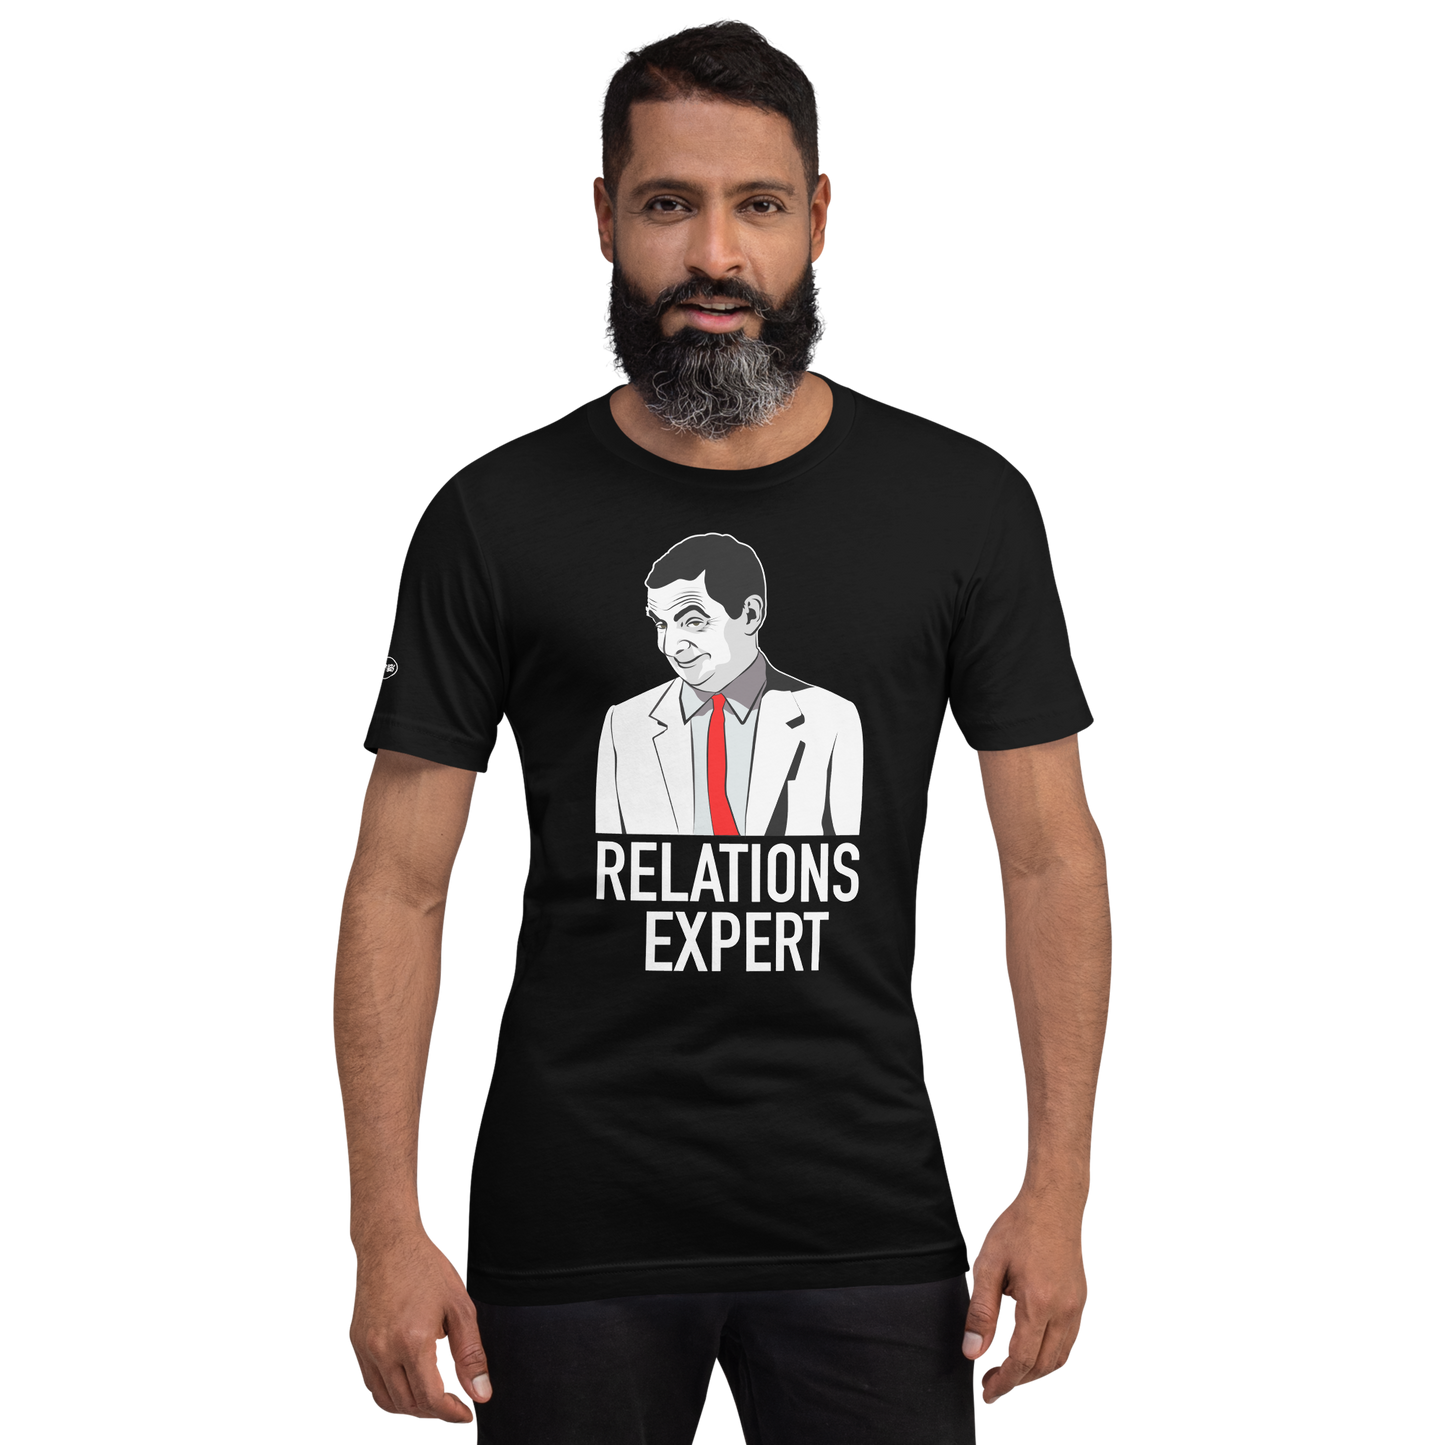 Relations Expert: If you know what i mean - Funny T-Shirt